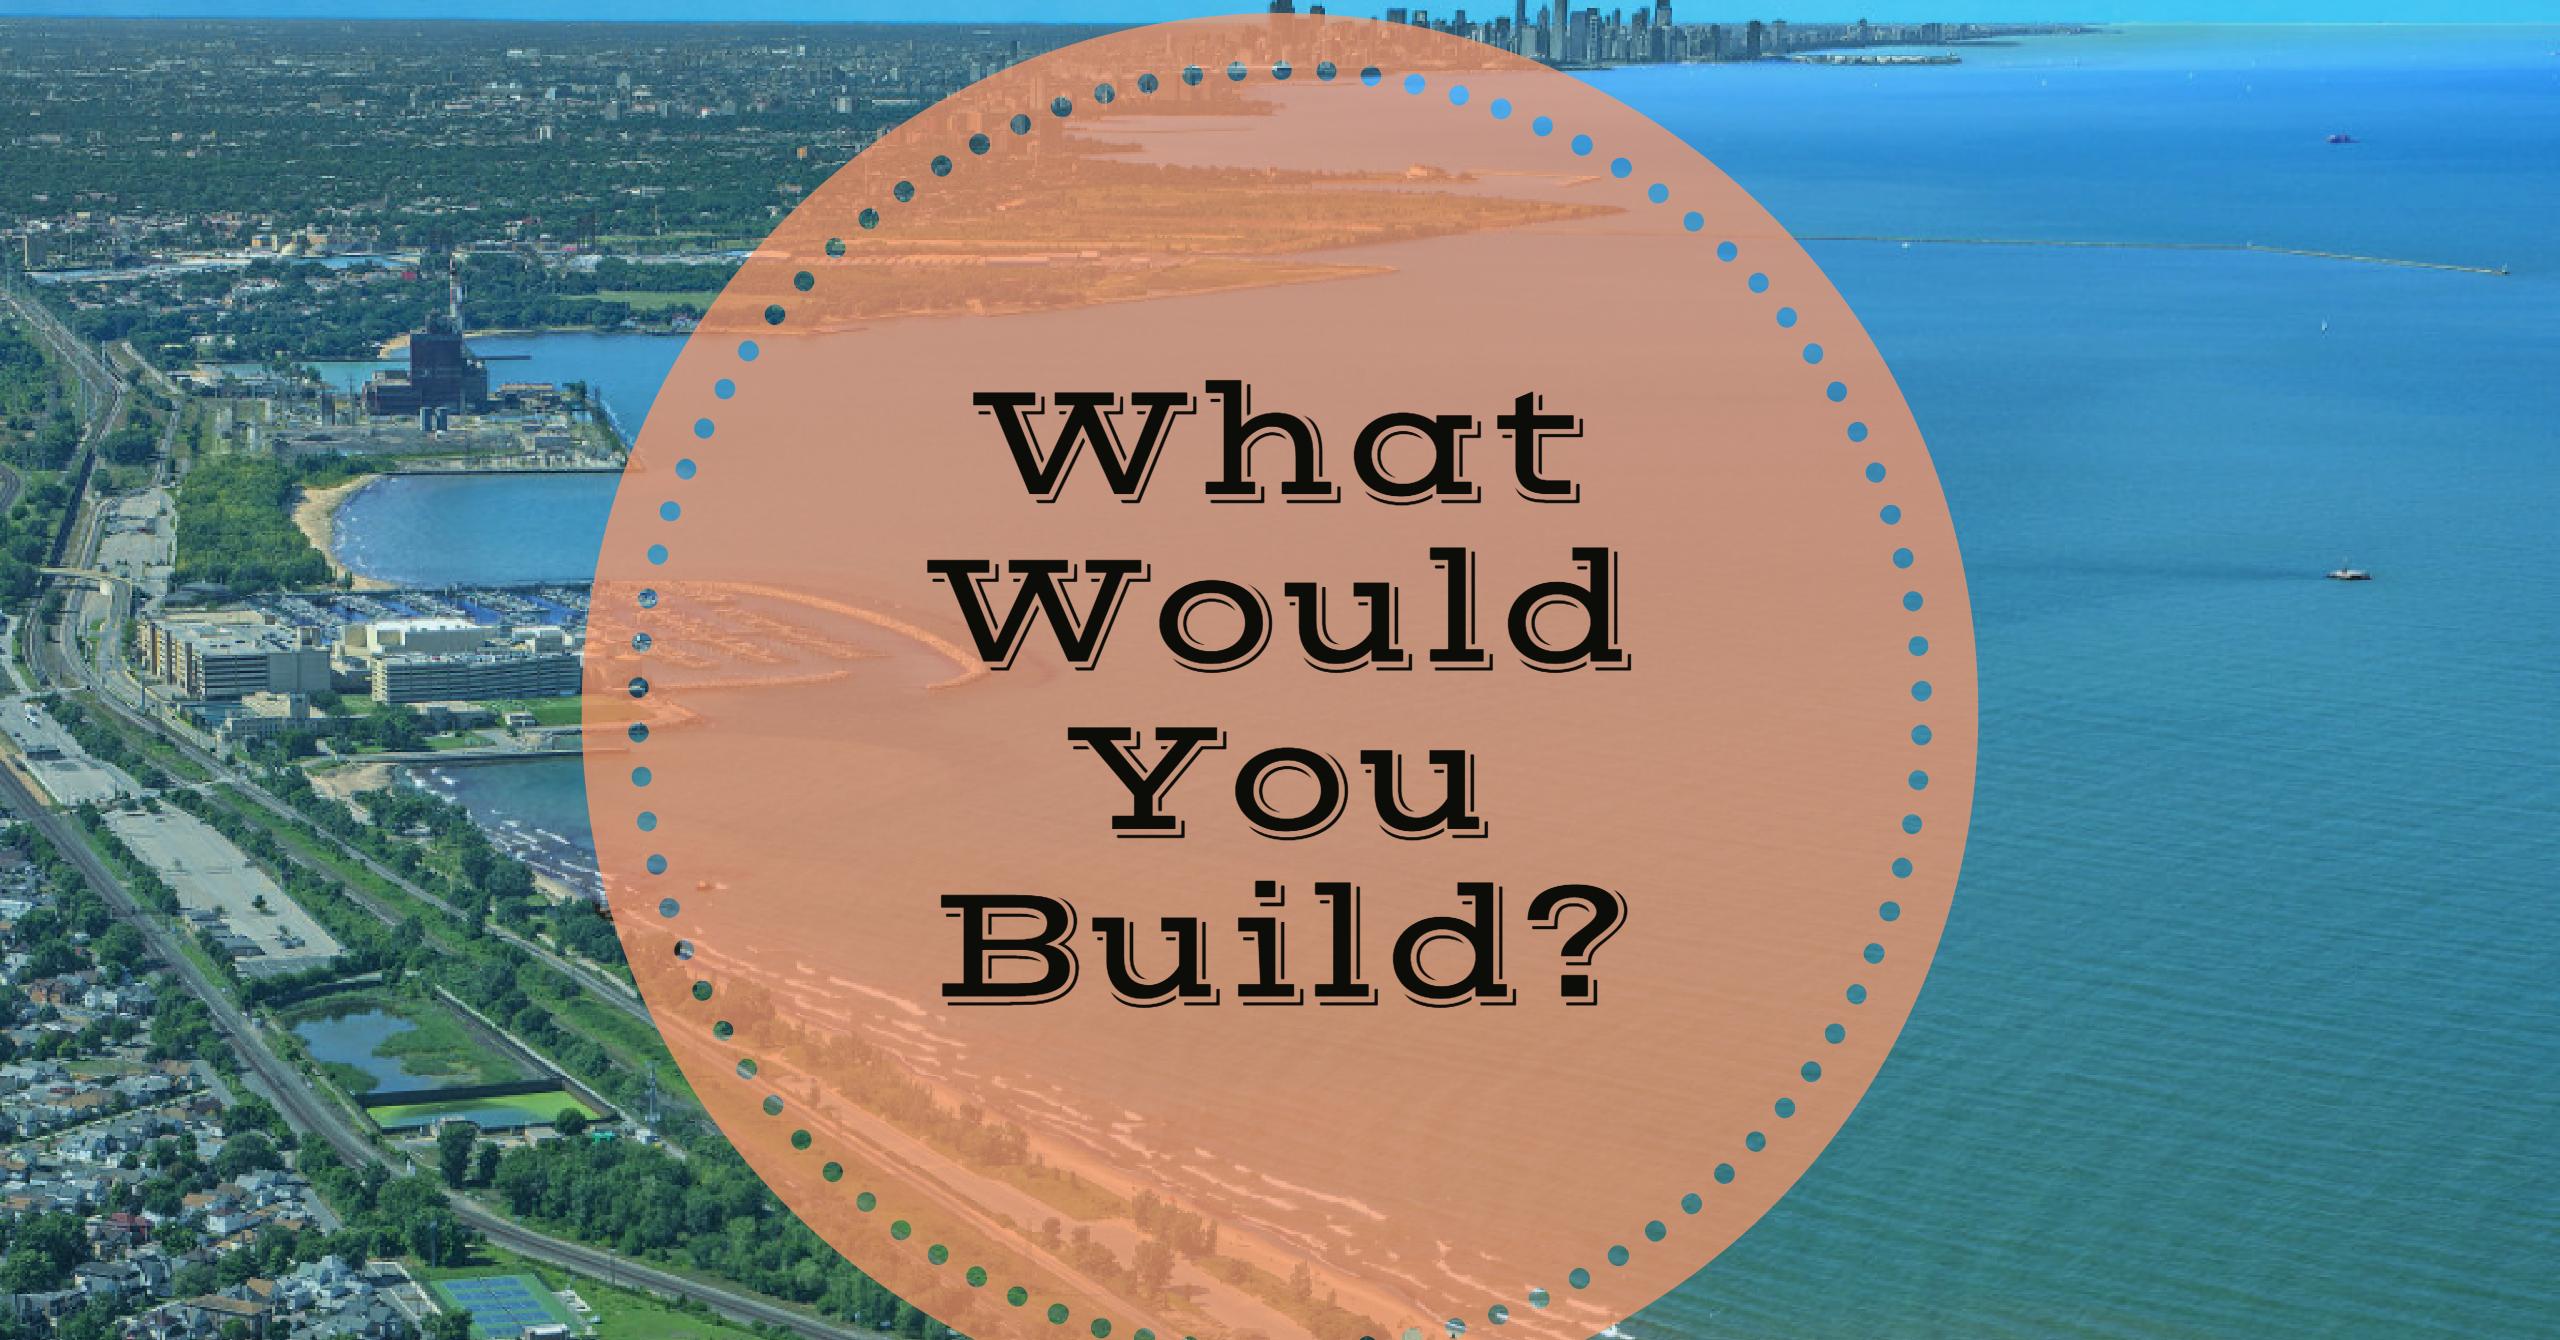 If Region Residents Could Build Something New, What Would They Build?